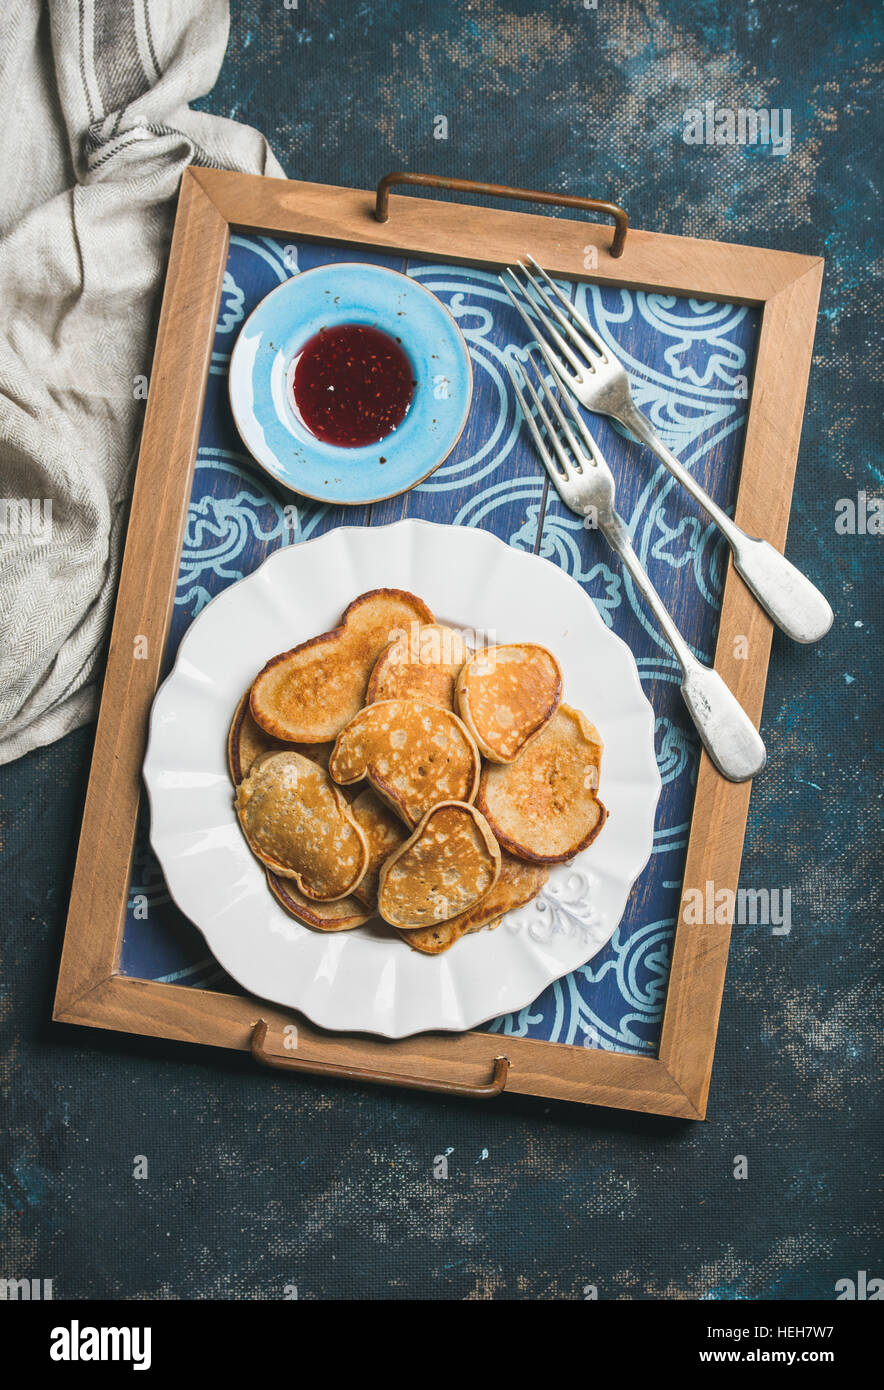 Breakfast tray with whole grain pancakes and raspberry jam. Top view, shabby dark blue background Stock Photo